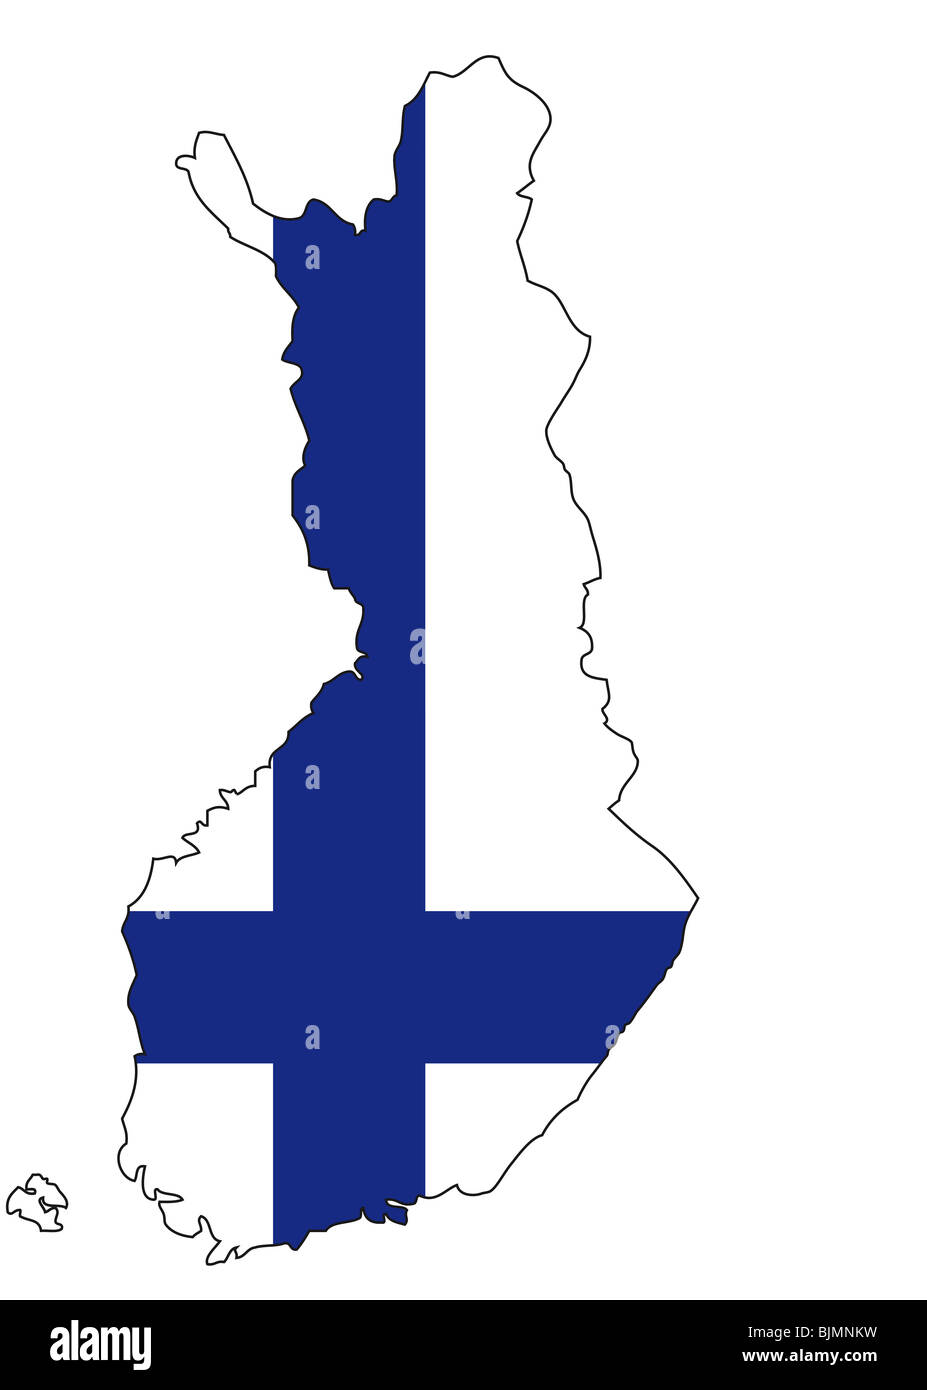 Finland, flag, outline Stock Photo